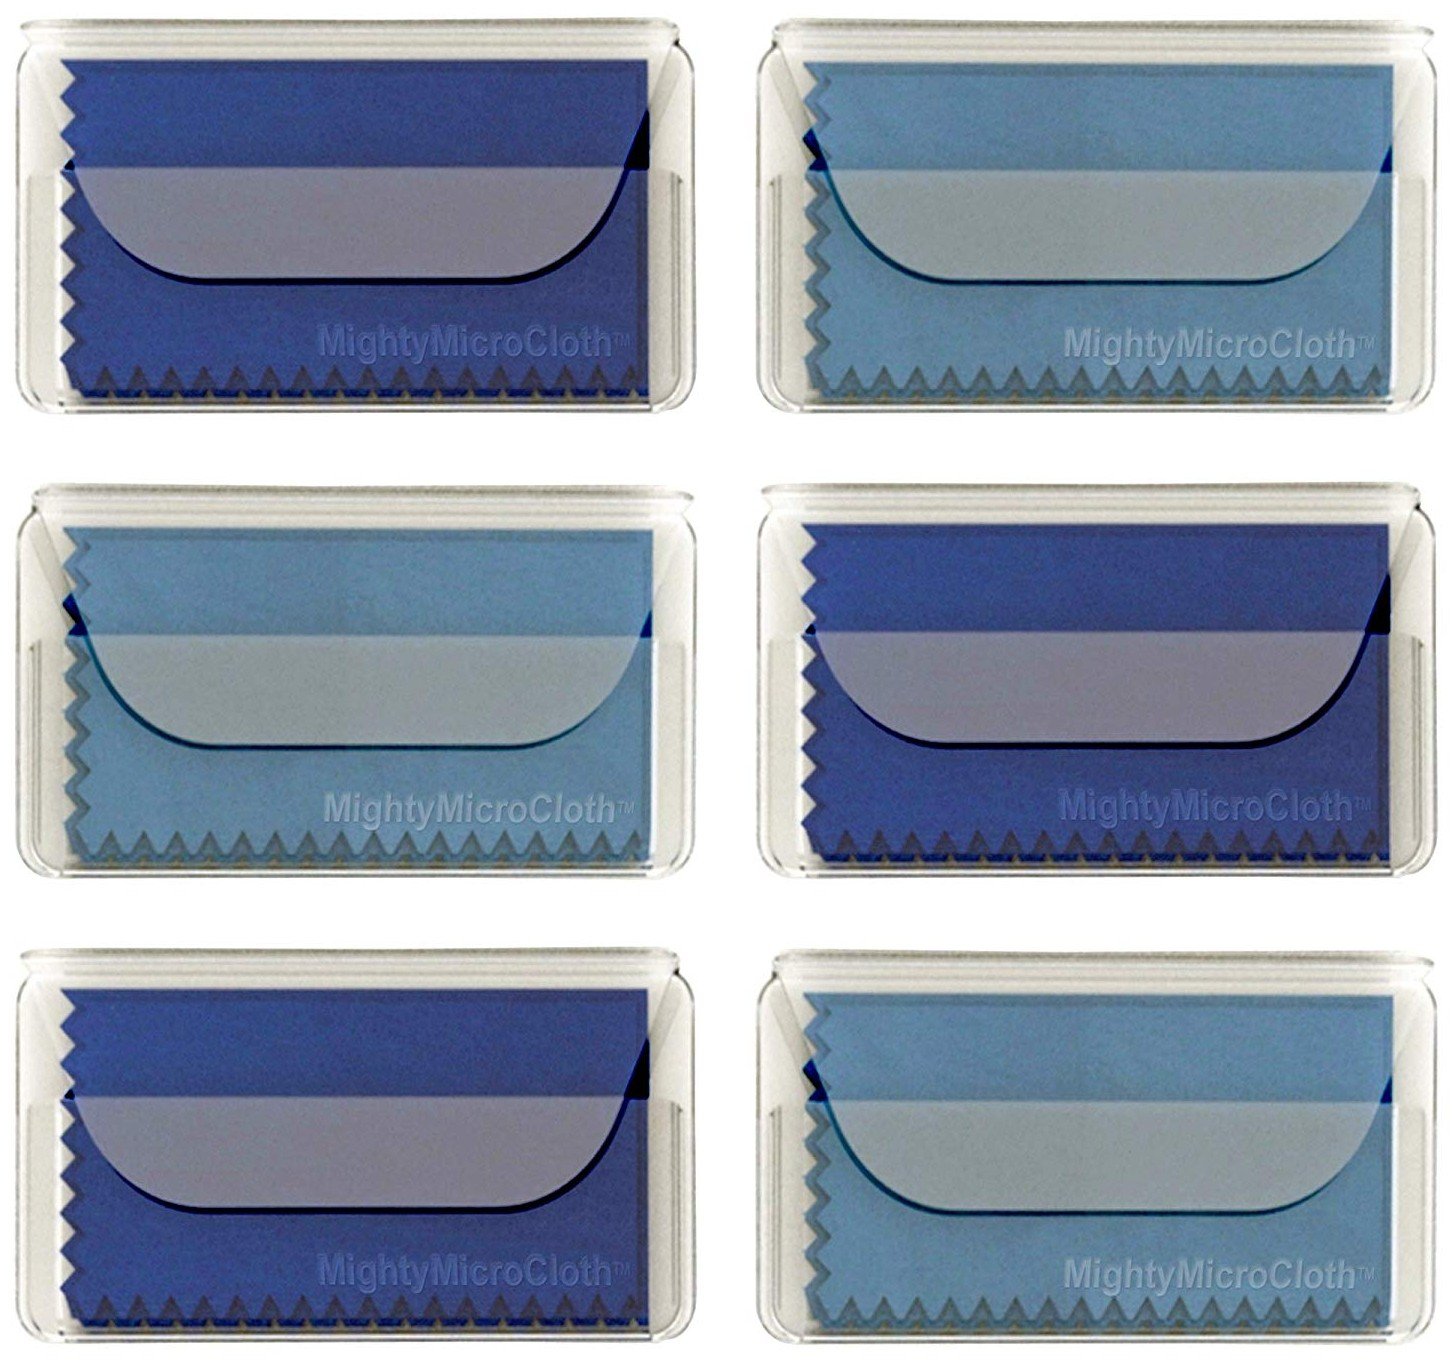 https://www.androidcentral.com/sites/androidcentral.com/files/article_images/2019/08/mighty-micro-cloth-blue-6-pack.jpg?itok=sm0CcTs_